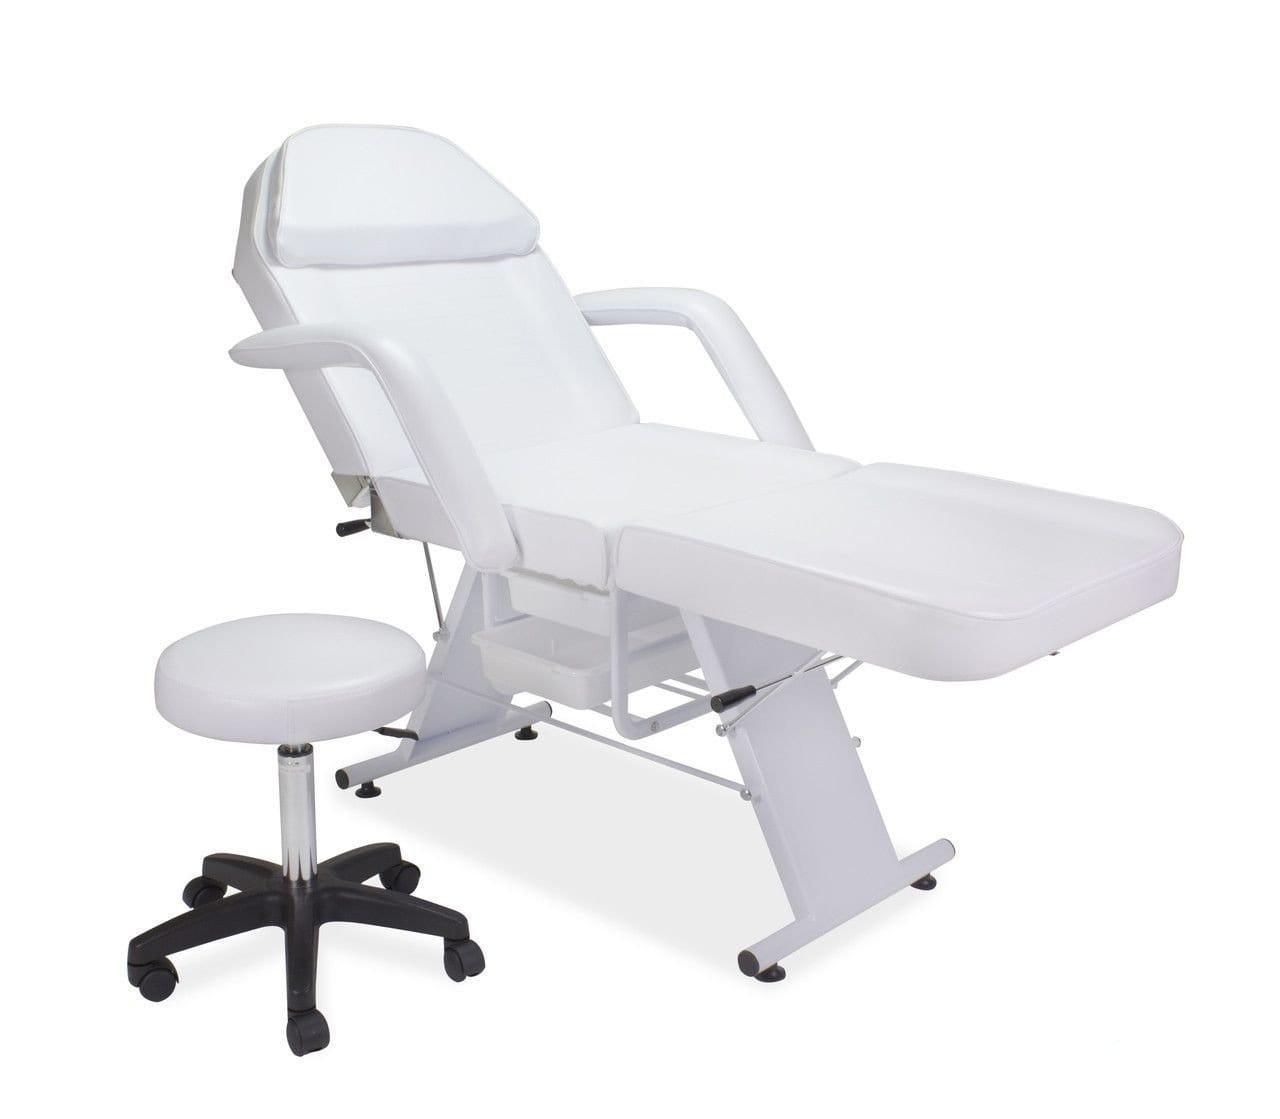 Globalstar Professional High Quality Beauty Facial Bed With Styling Stool White BS-616 - Awarid UAE